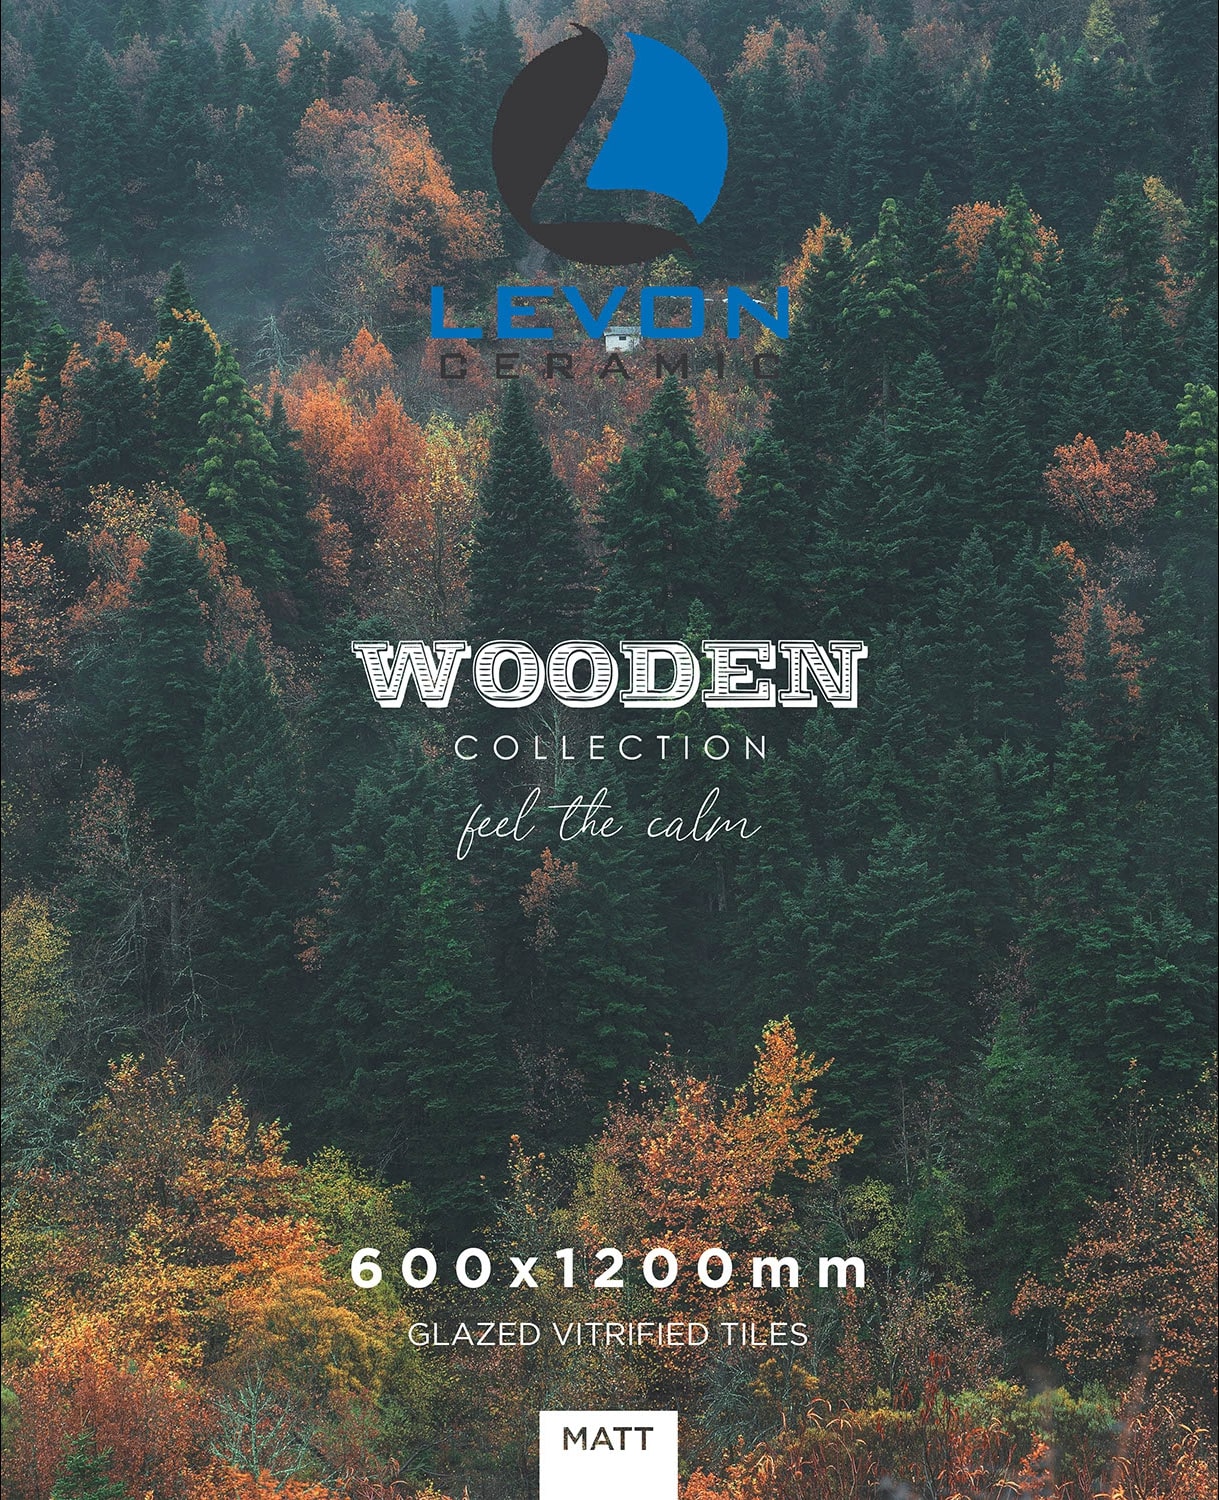 Wooden Collection catalogue